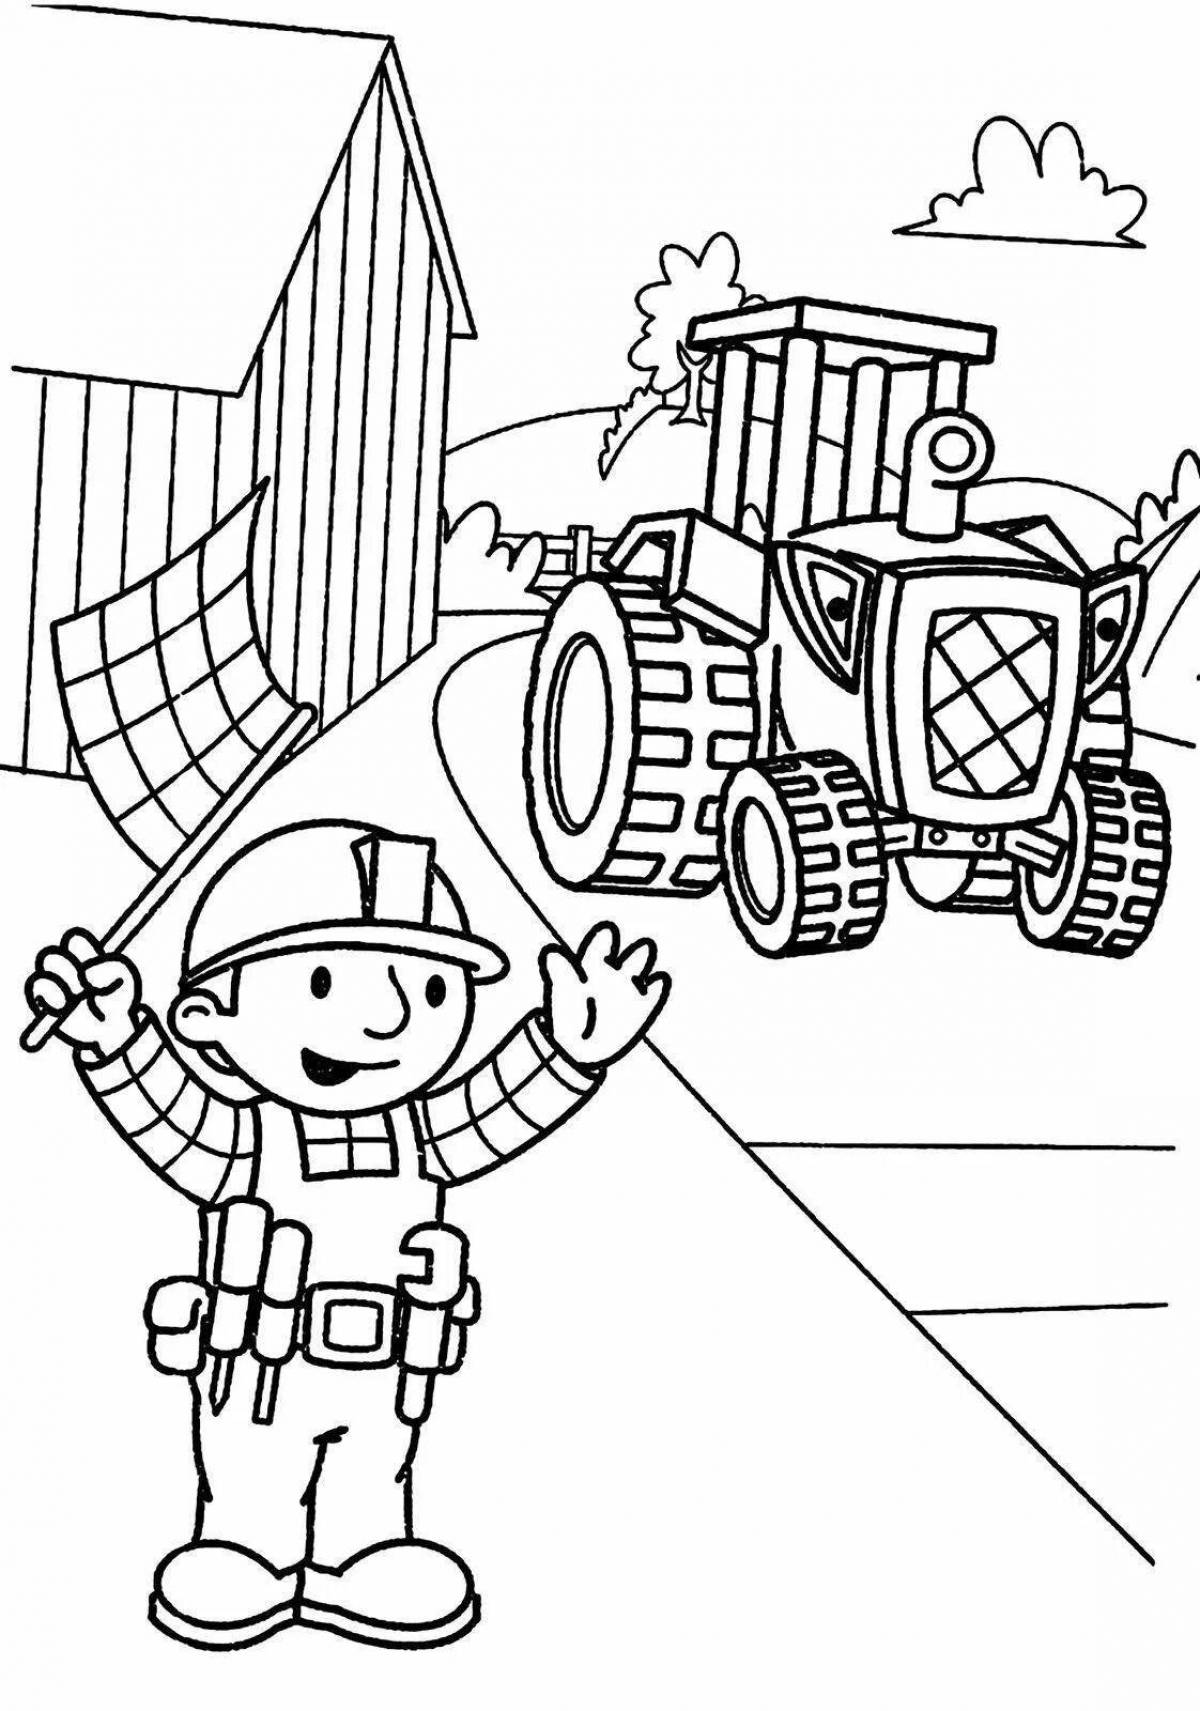 Adorable building coloring book for kids